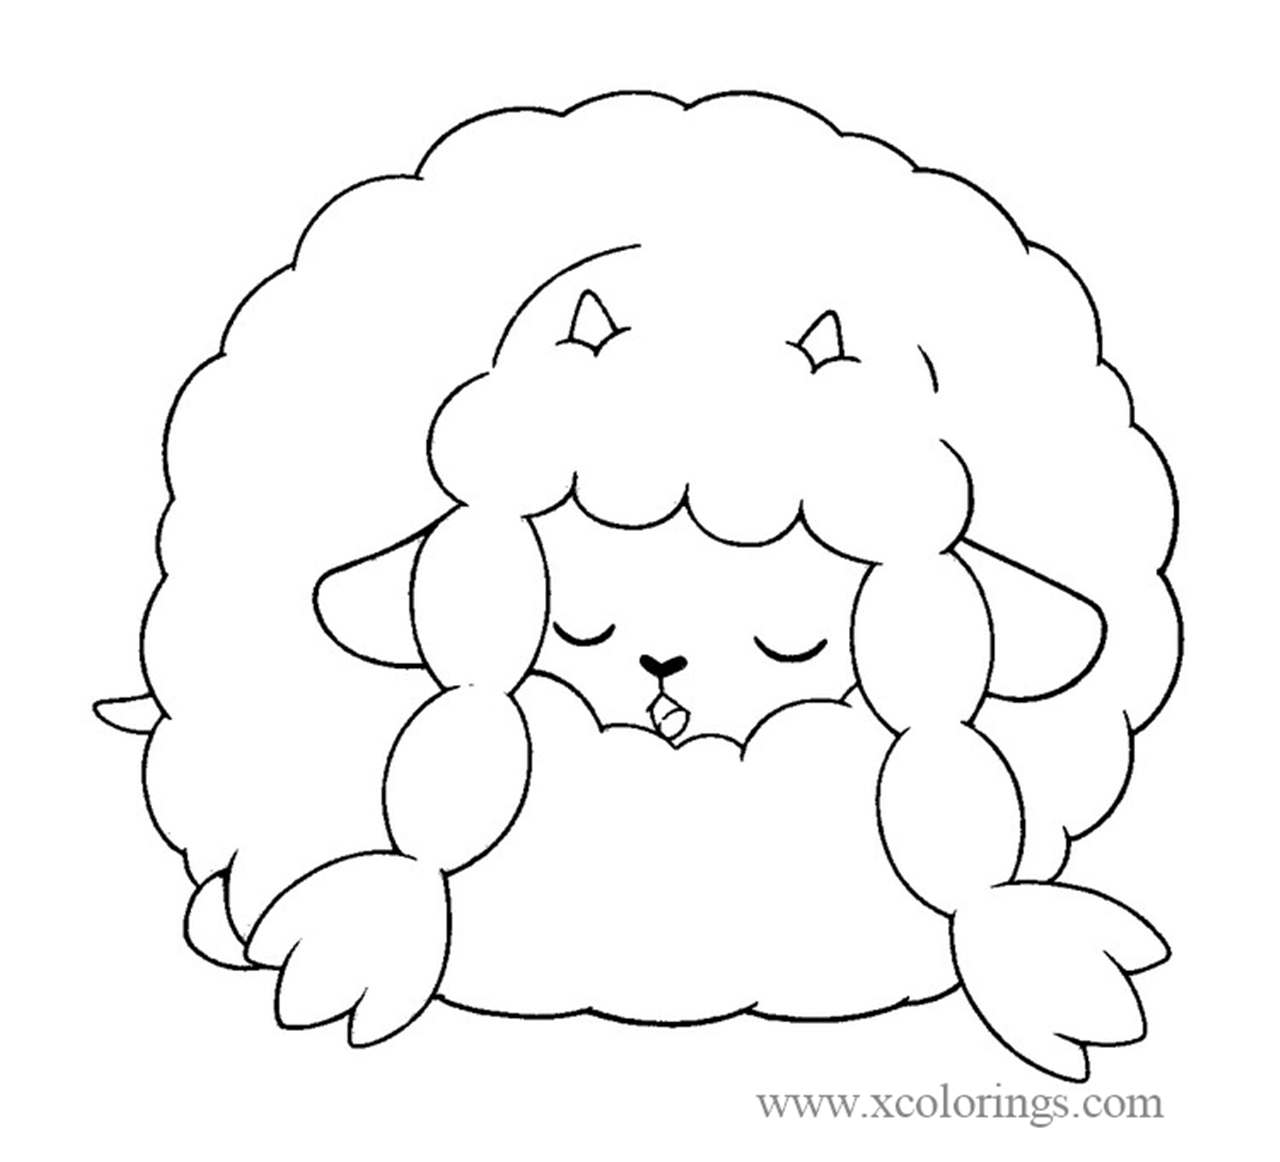 Free Wooloo from Pokemon Sword and Shield Coloring Pages printable